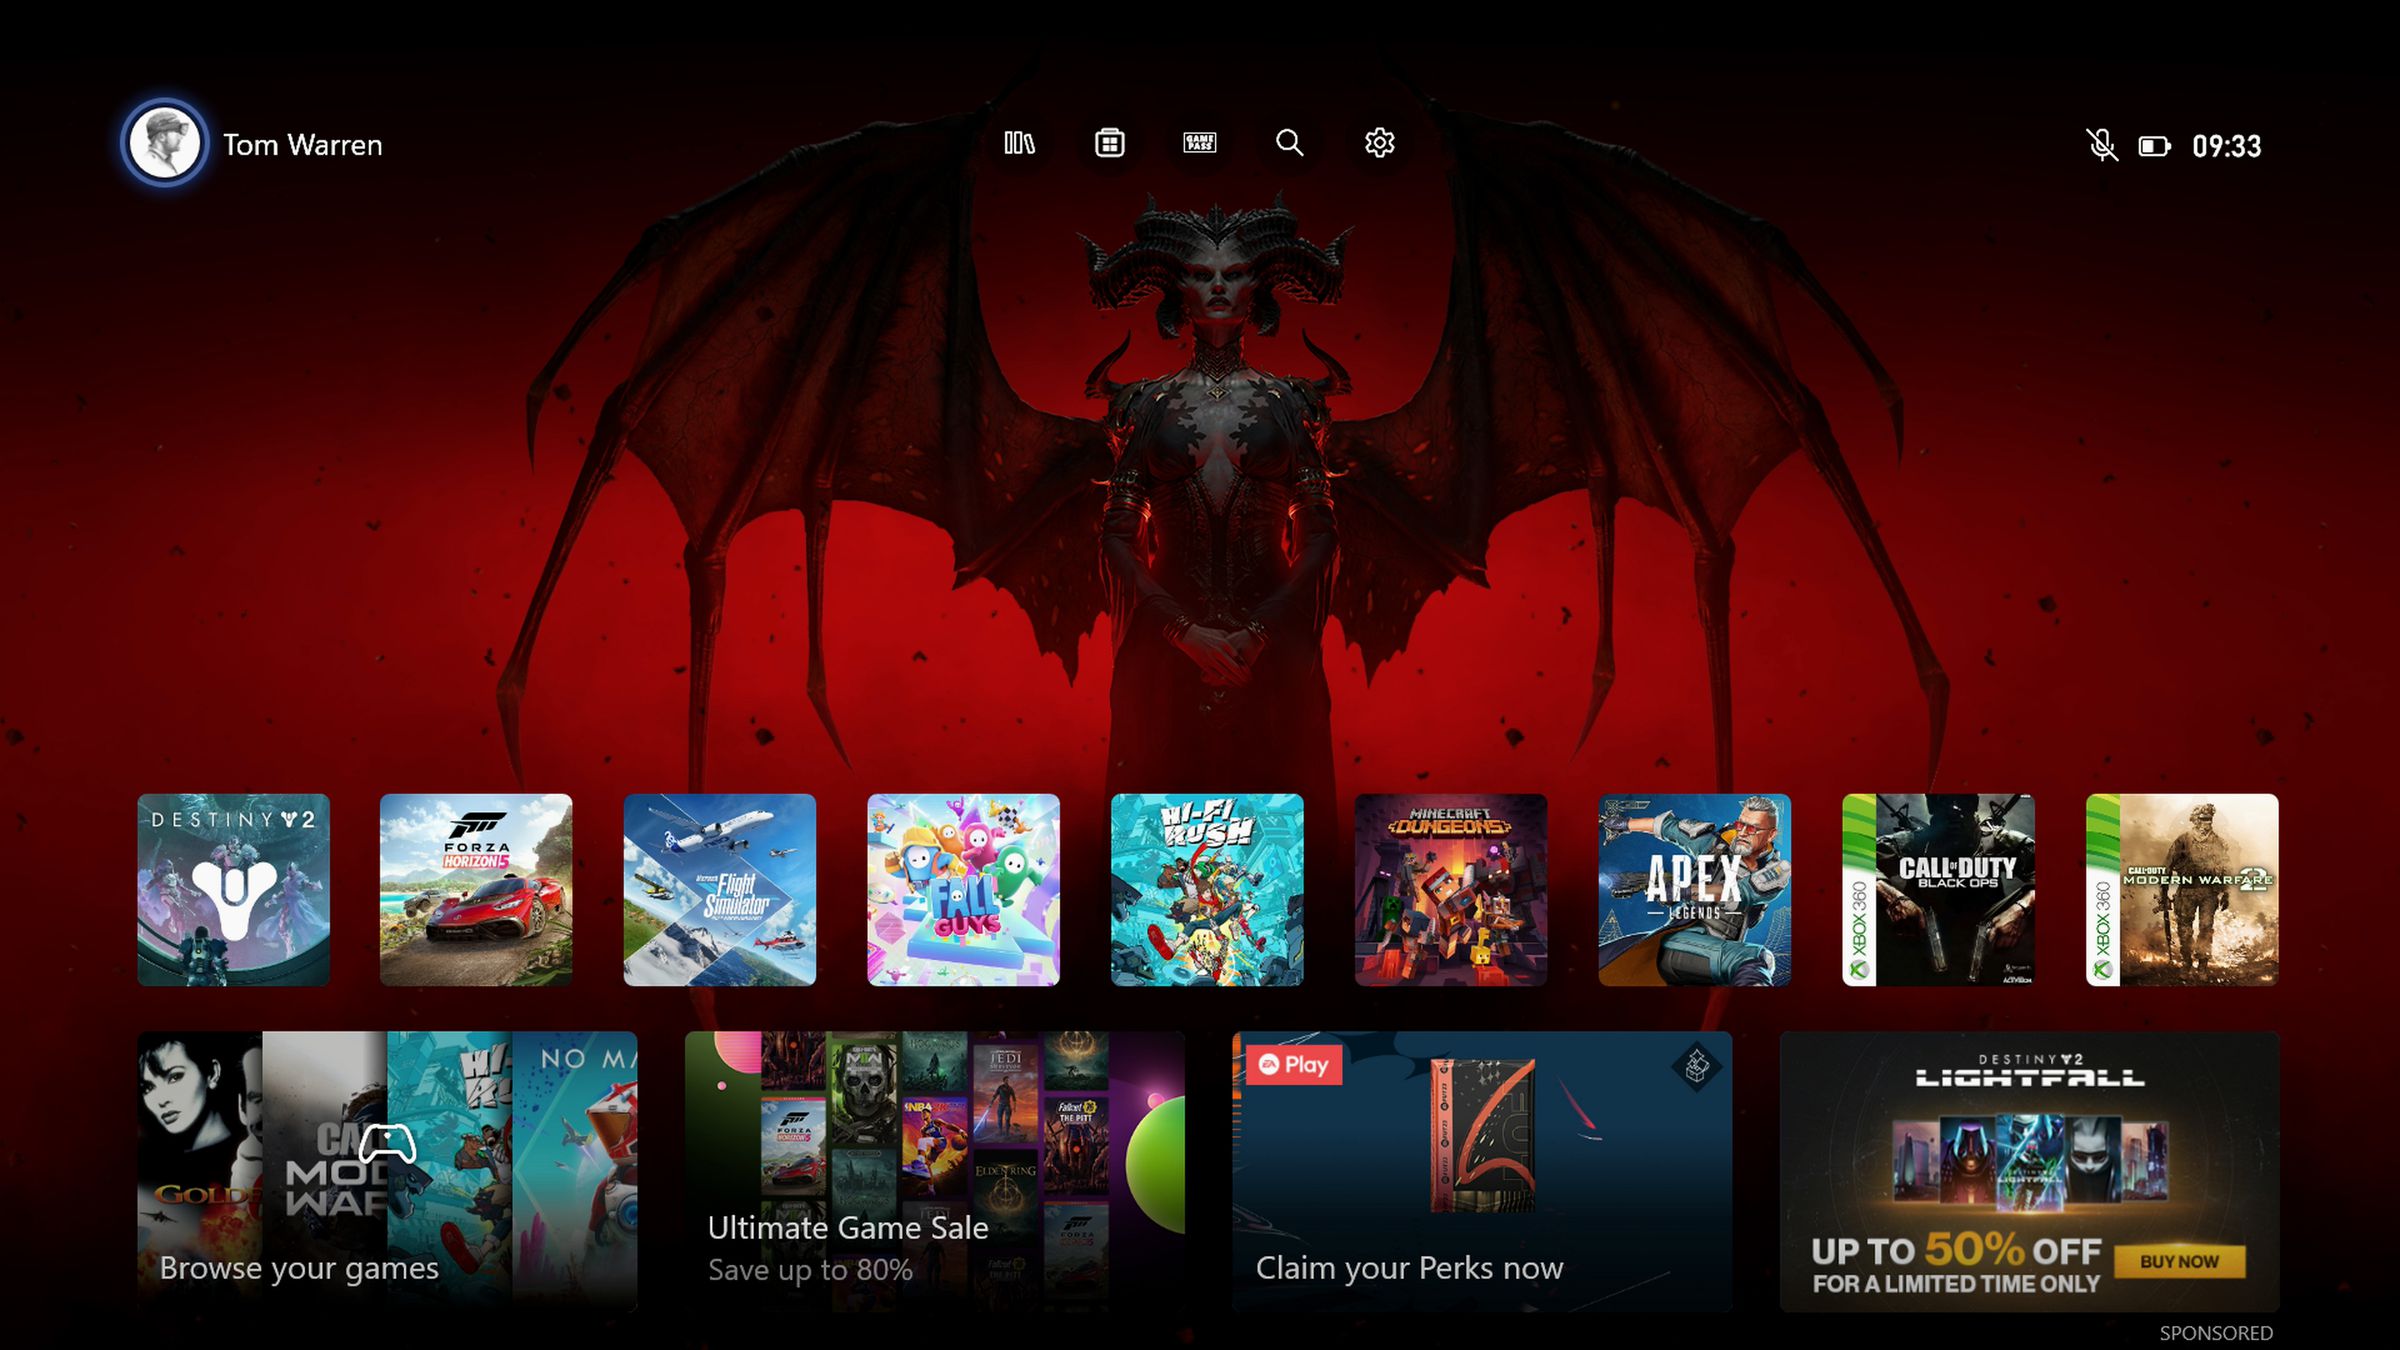 The new Xbox Home UI.